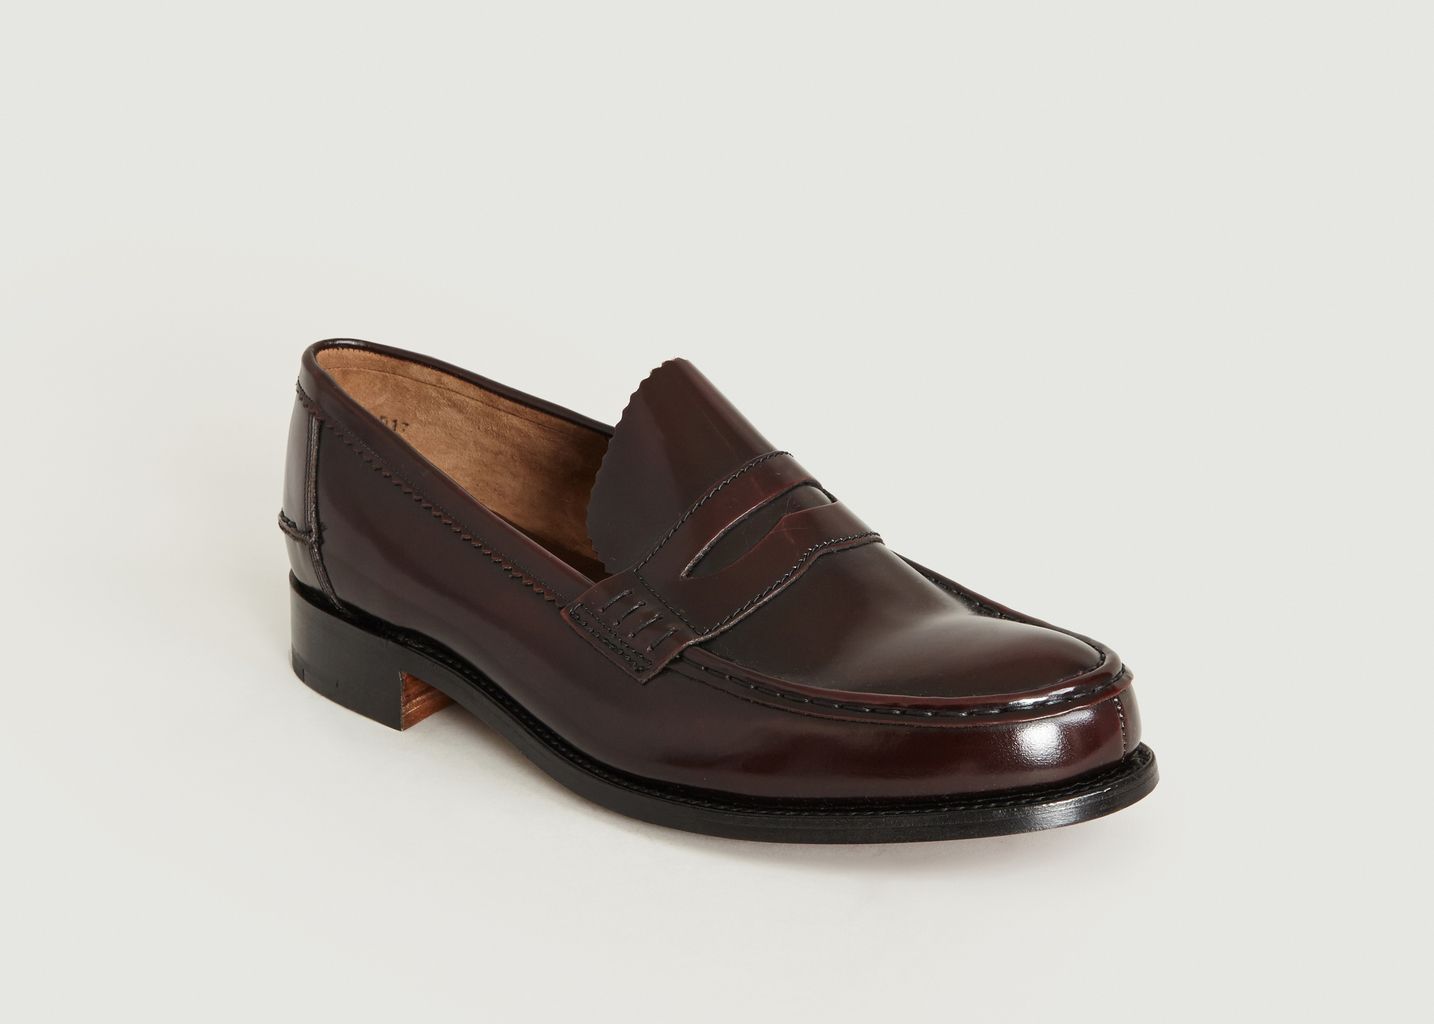 Caruso Moccasins - Barker Shoes